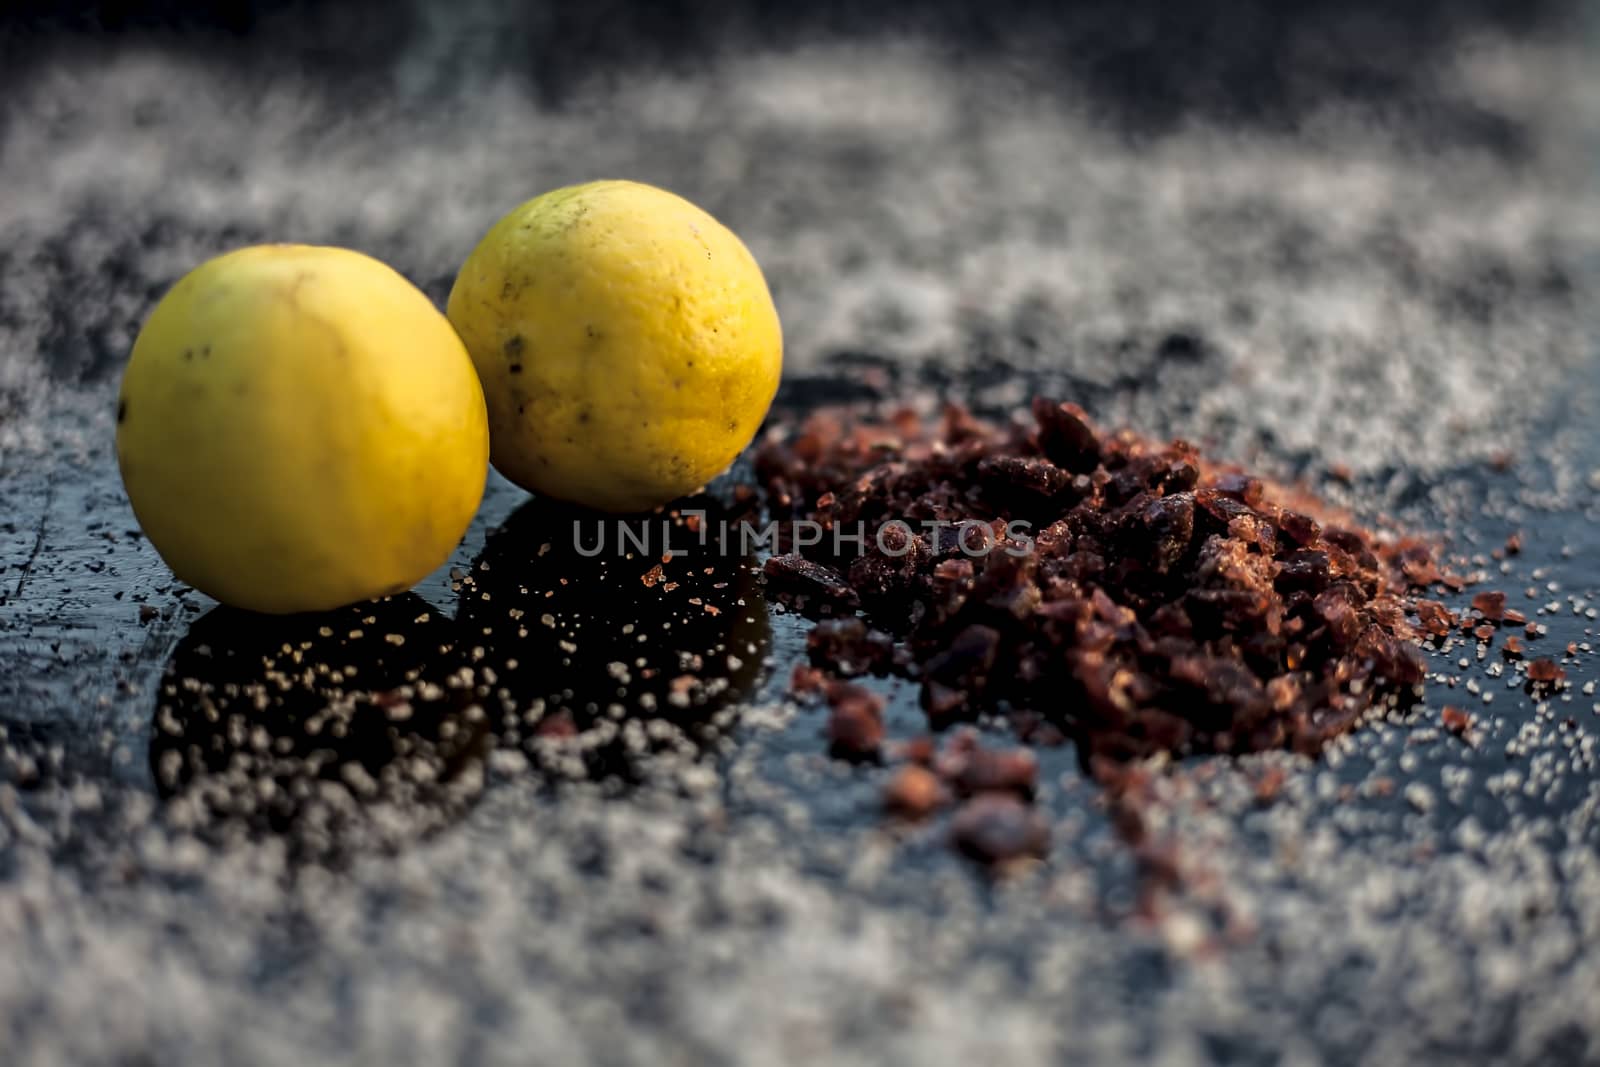 Pair of raw organic ripe yellow lemons on a black surface along with some rock salt (sendha namak) and white or common salt spread on the surface. Used for the salt remedy of skin and as a face mask.